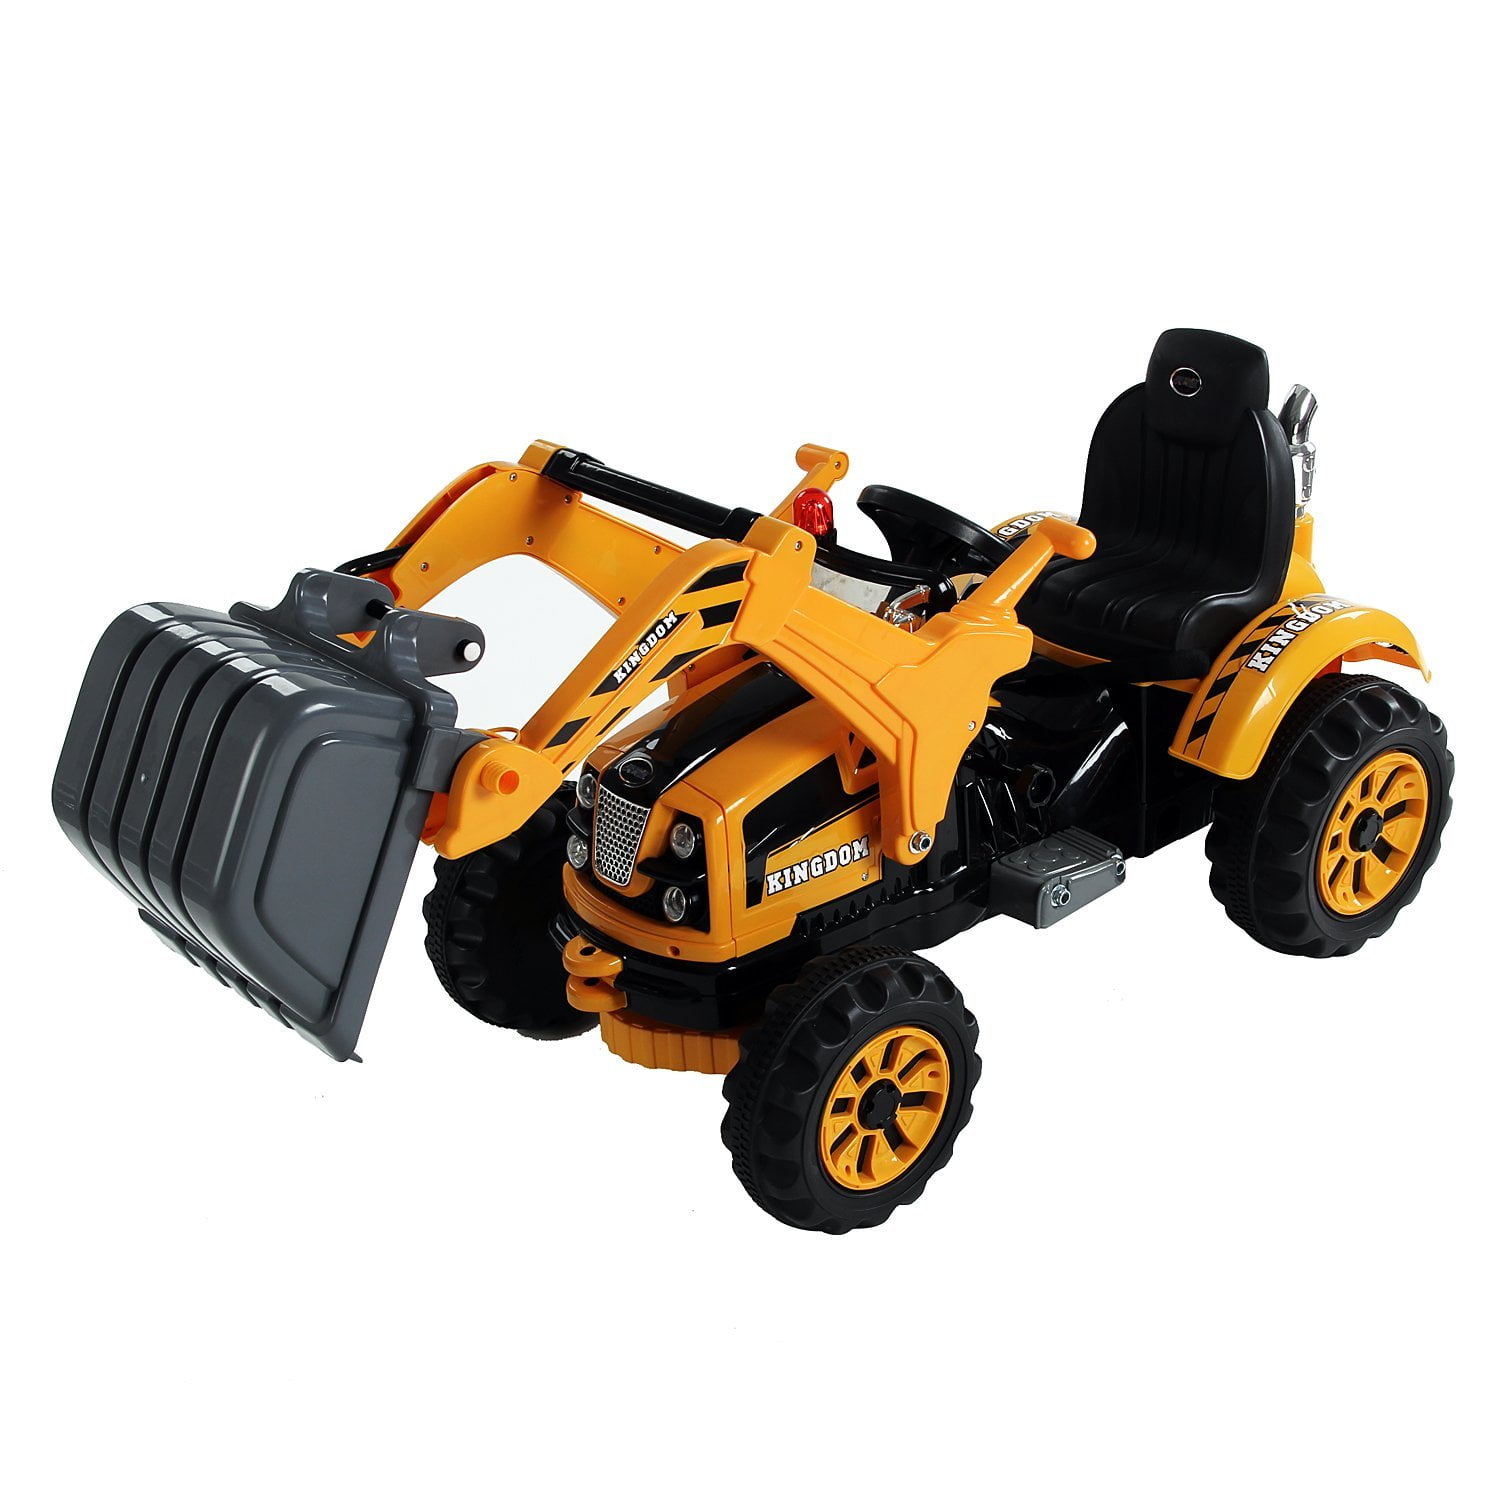 Kids Toddler Ride on Excavator Digger Truck Scooter Free Shipping/60 Day Return 